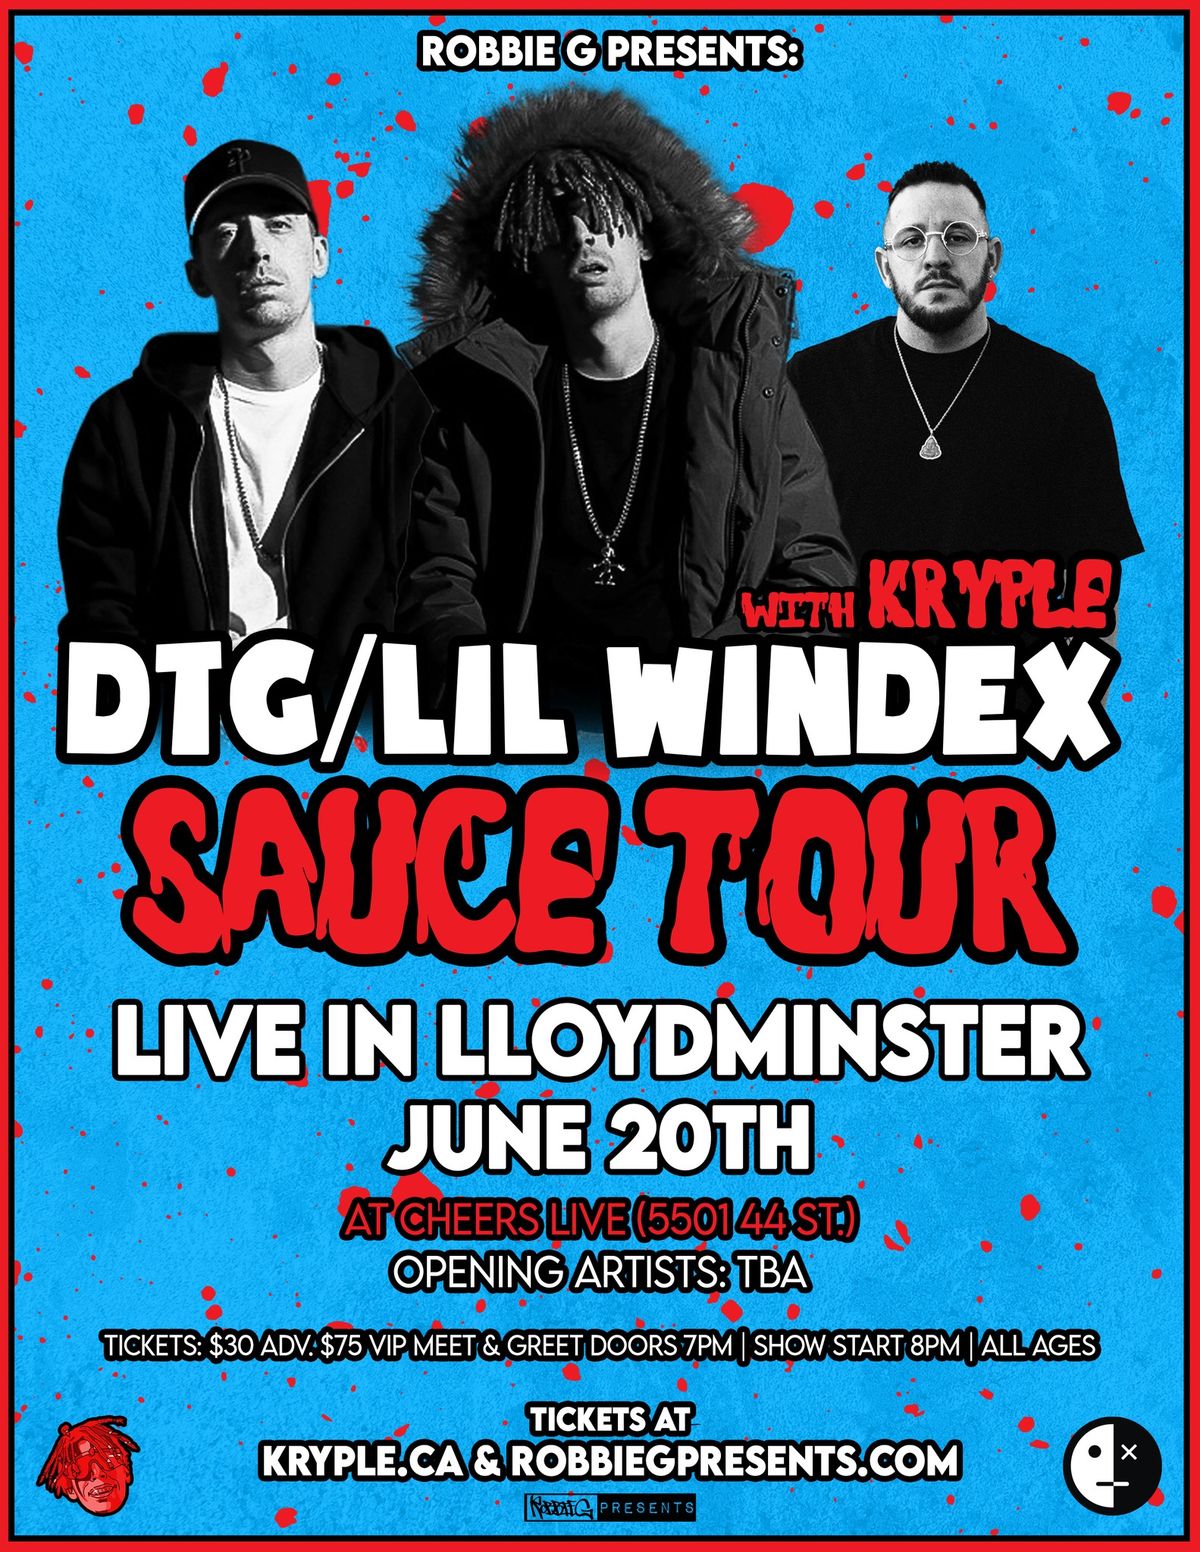 DTG\/Lil Windex Live in Lloydminster June 20th at Cheers Live with Kryple